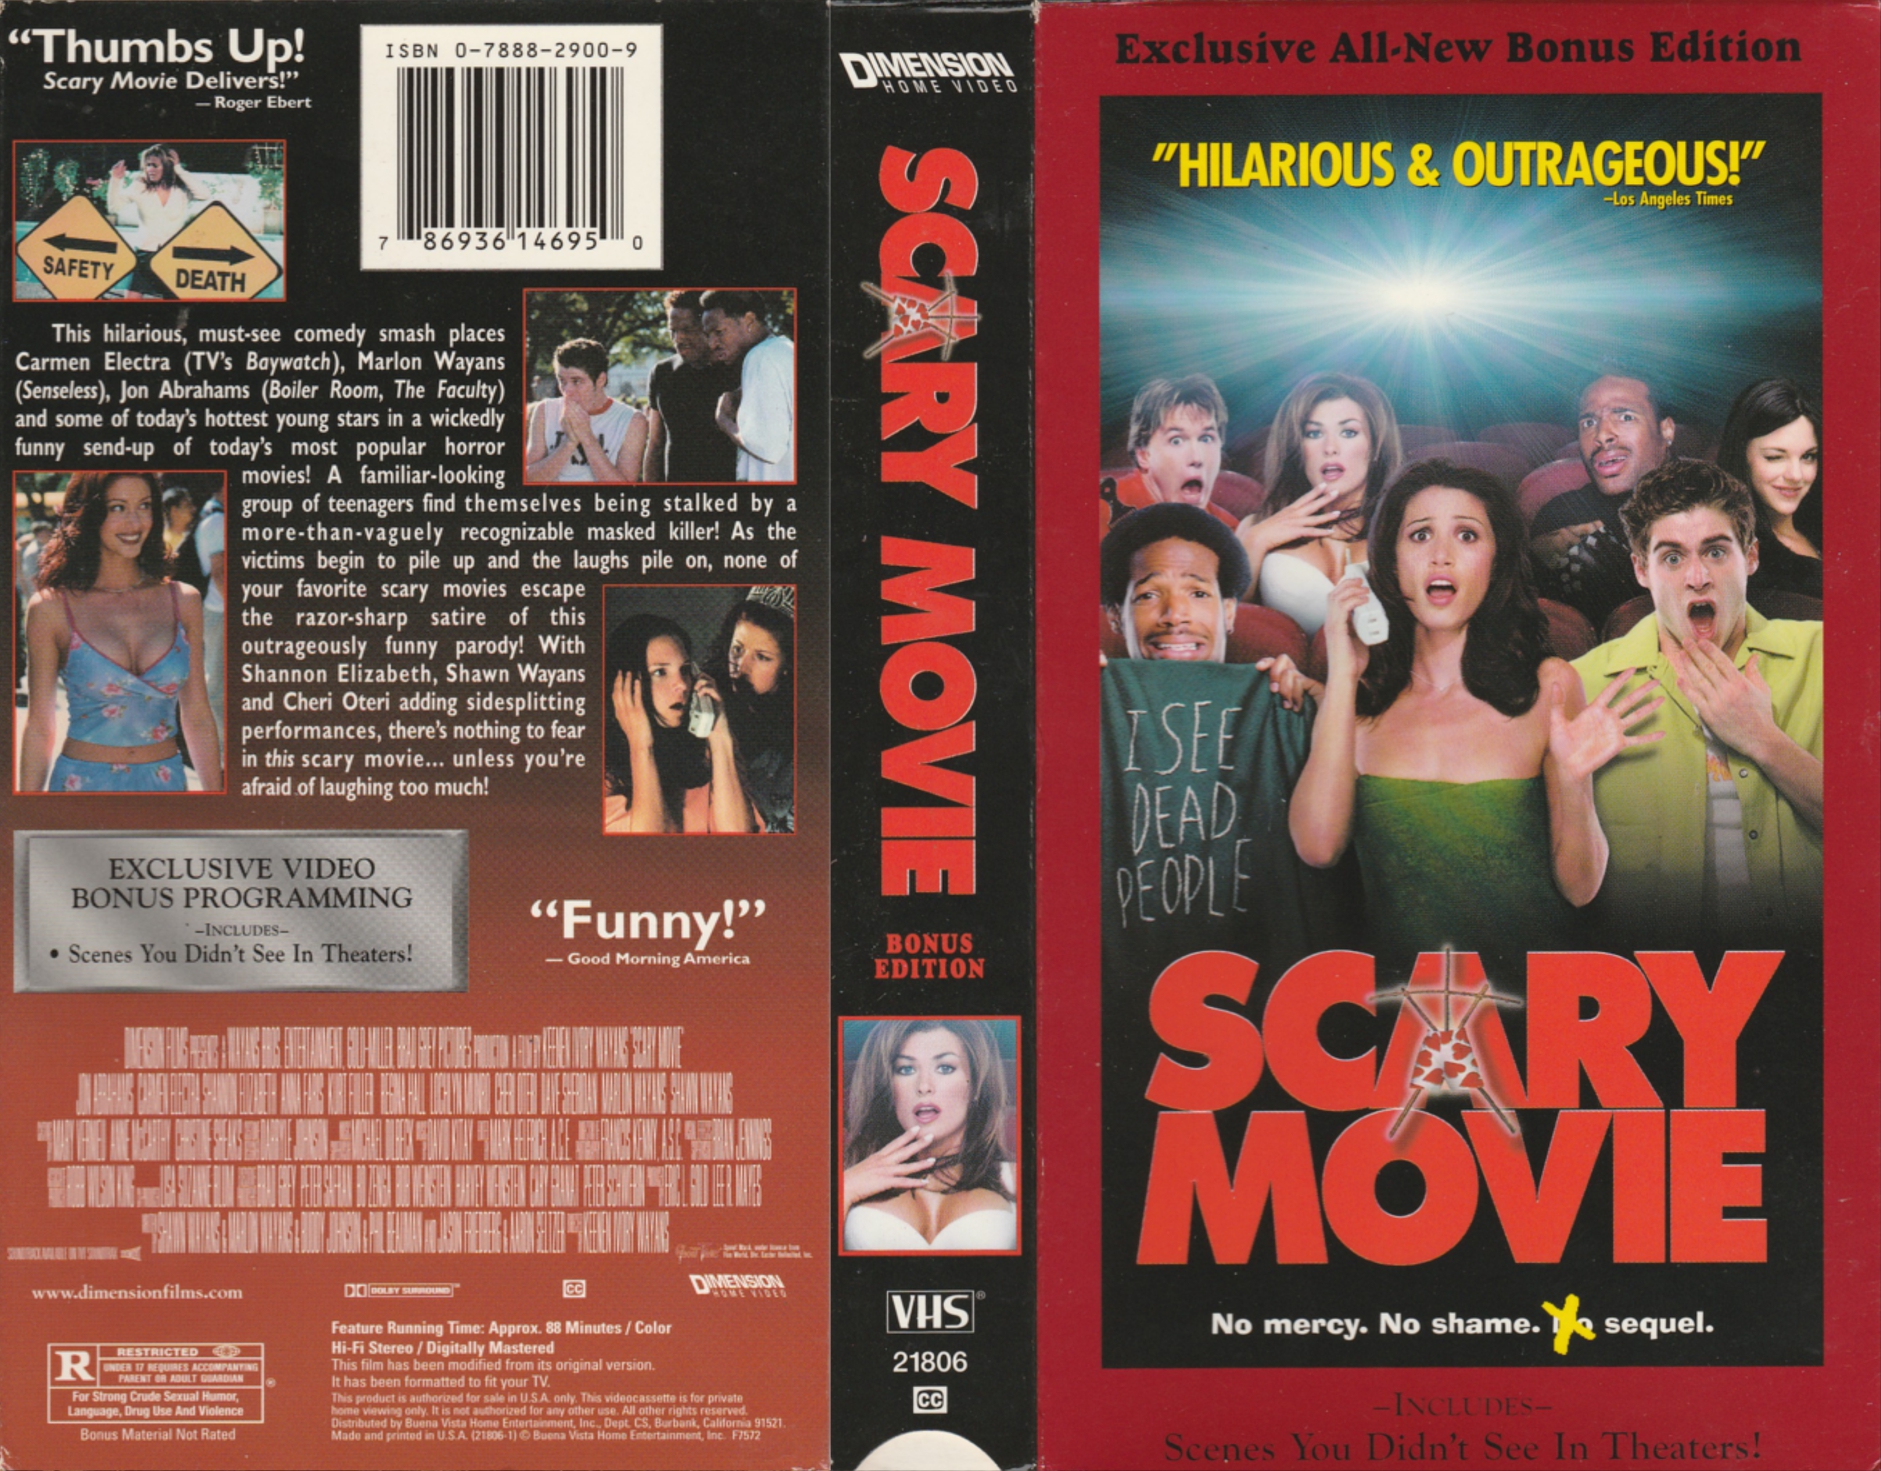 Universal Horrors Vhs Covers